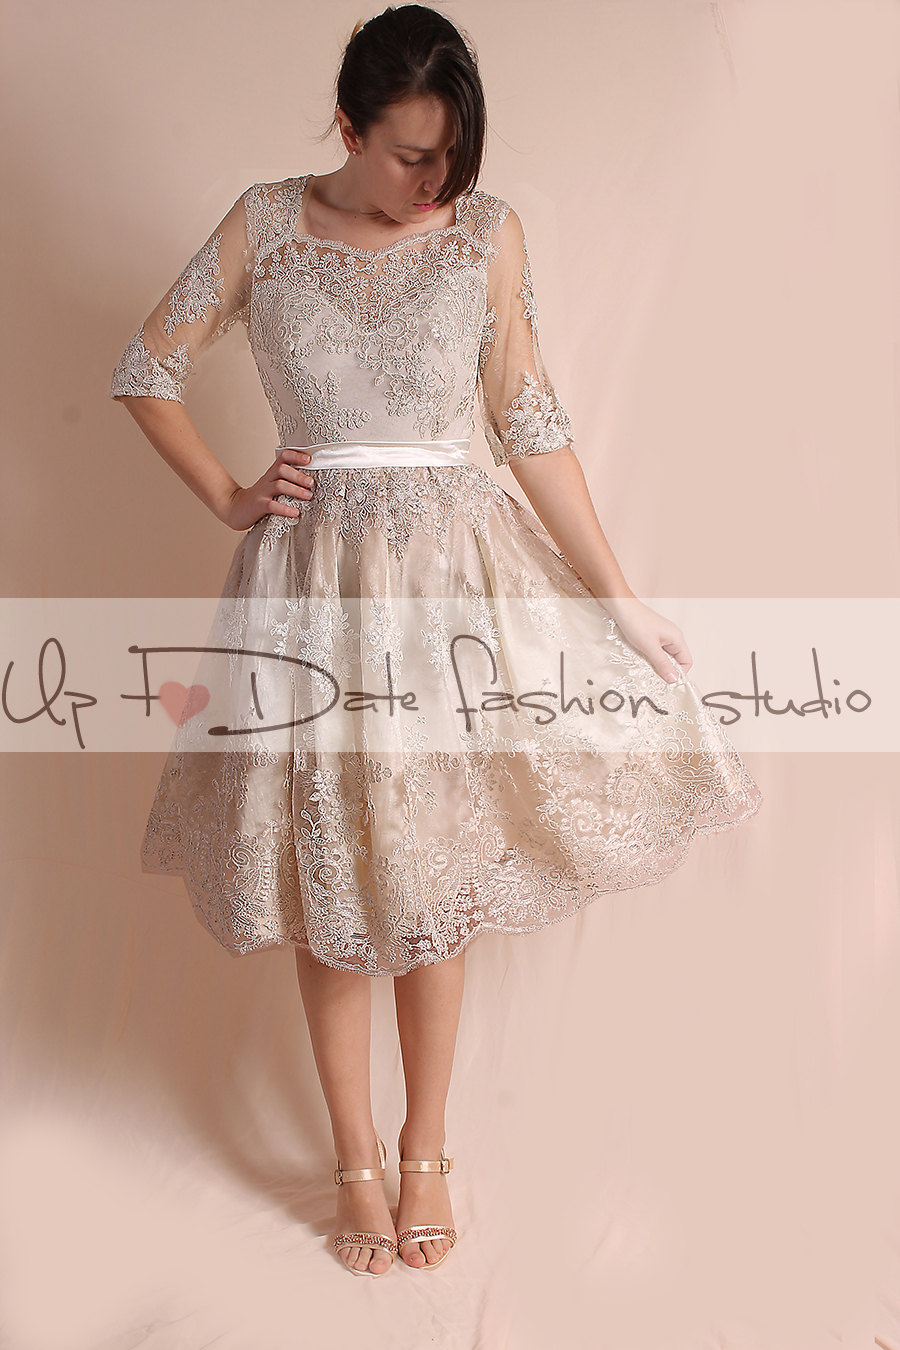 Party / Cocktail / evening/ knee length/ lace dress/ 3/4 Sleeves /open back/ ekryu dress